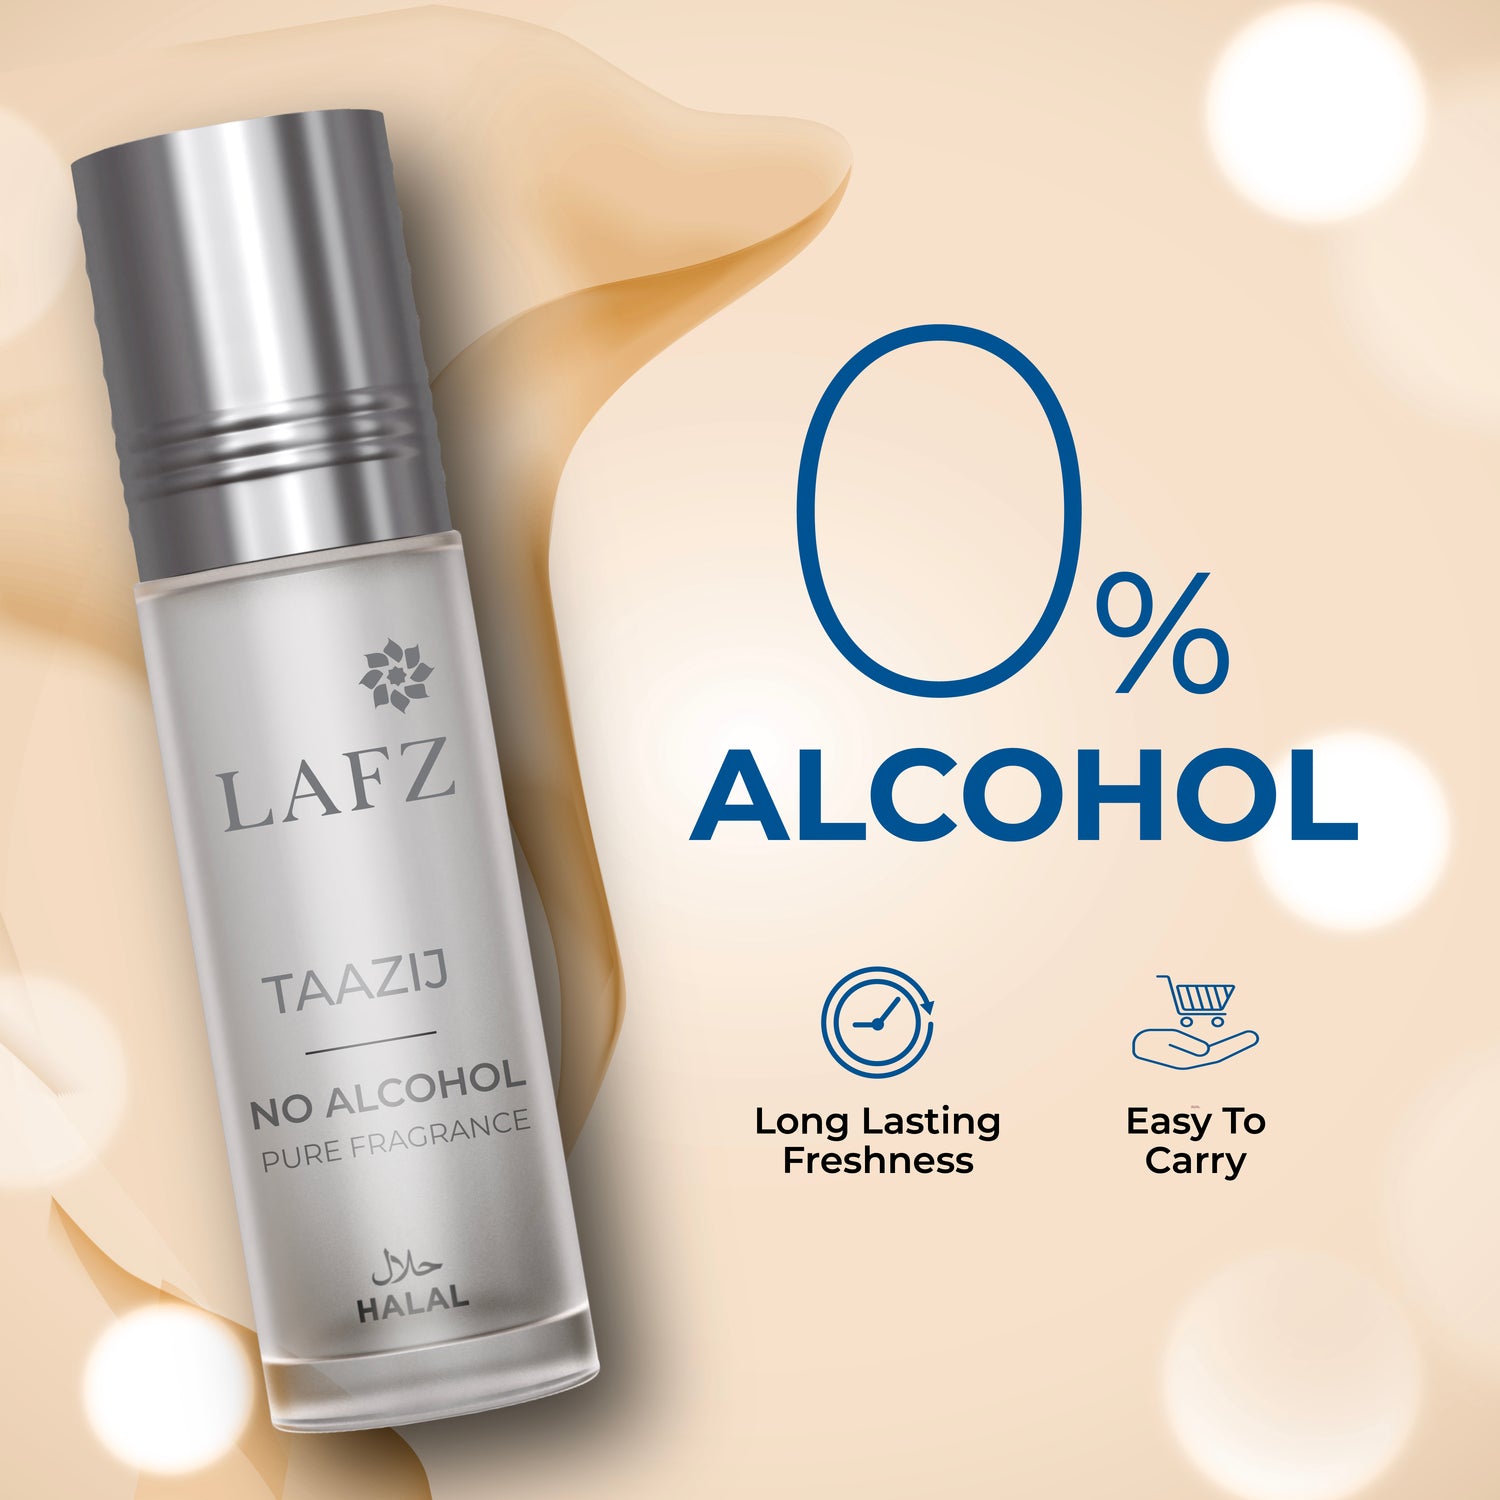 Lafz Pure Fragrance No Alcohol Perfume Roll On (8ml) - Taazij